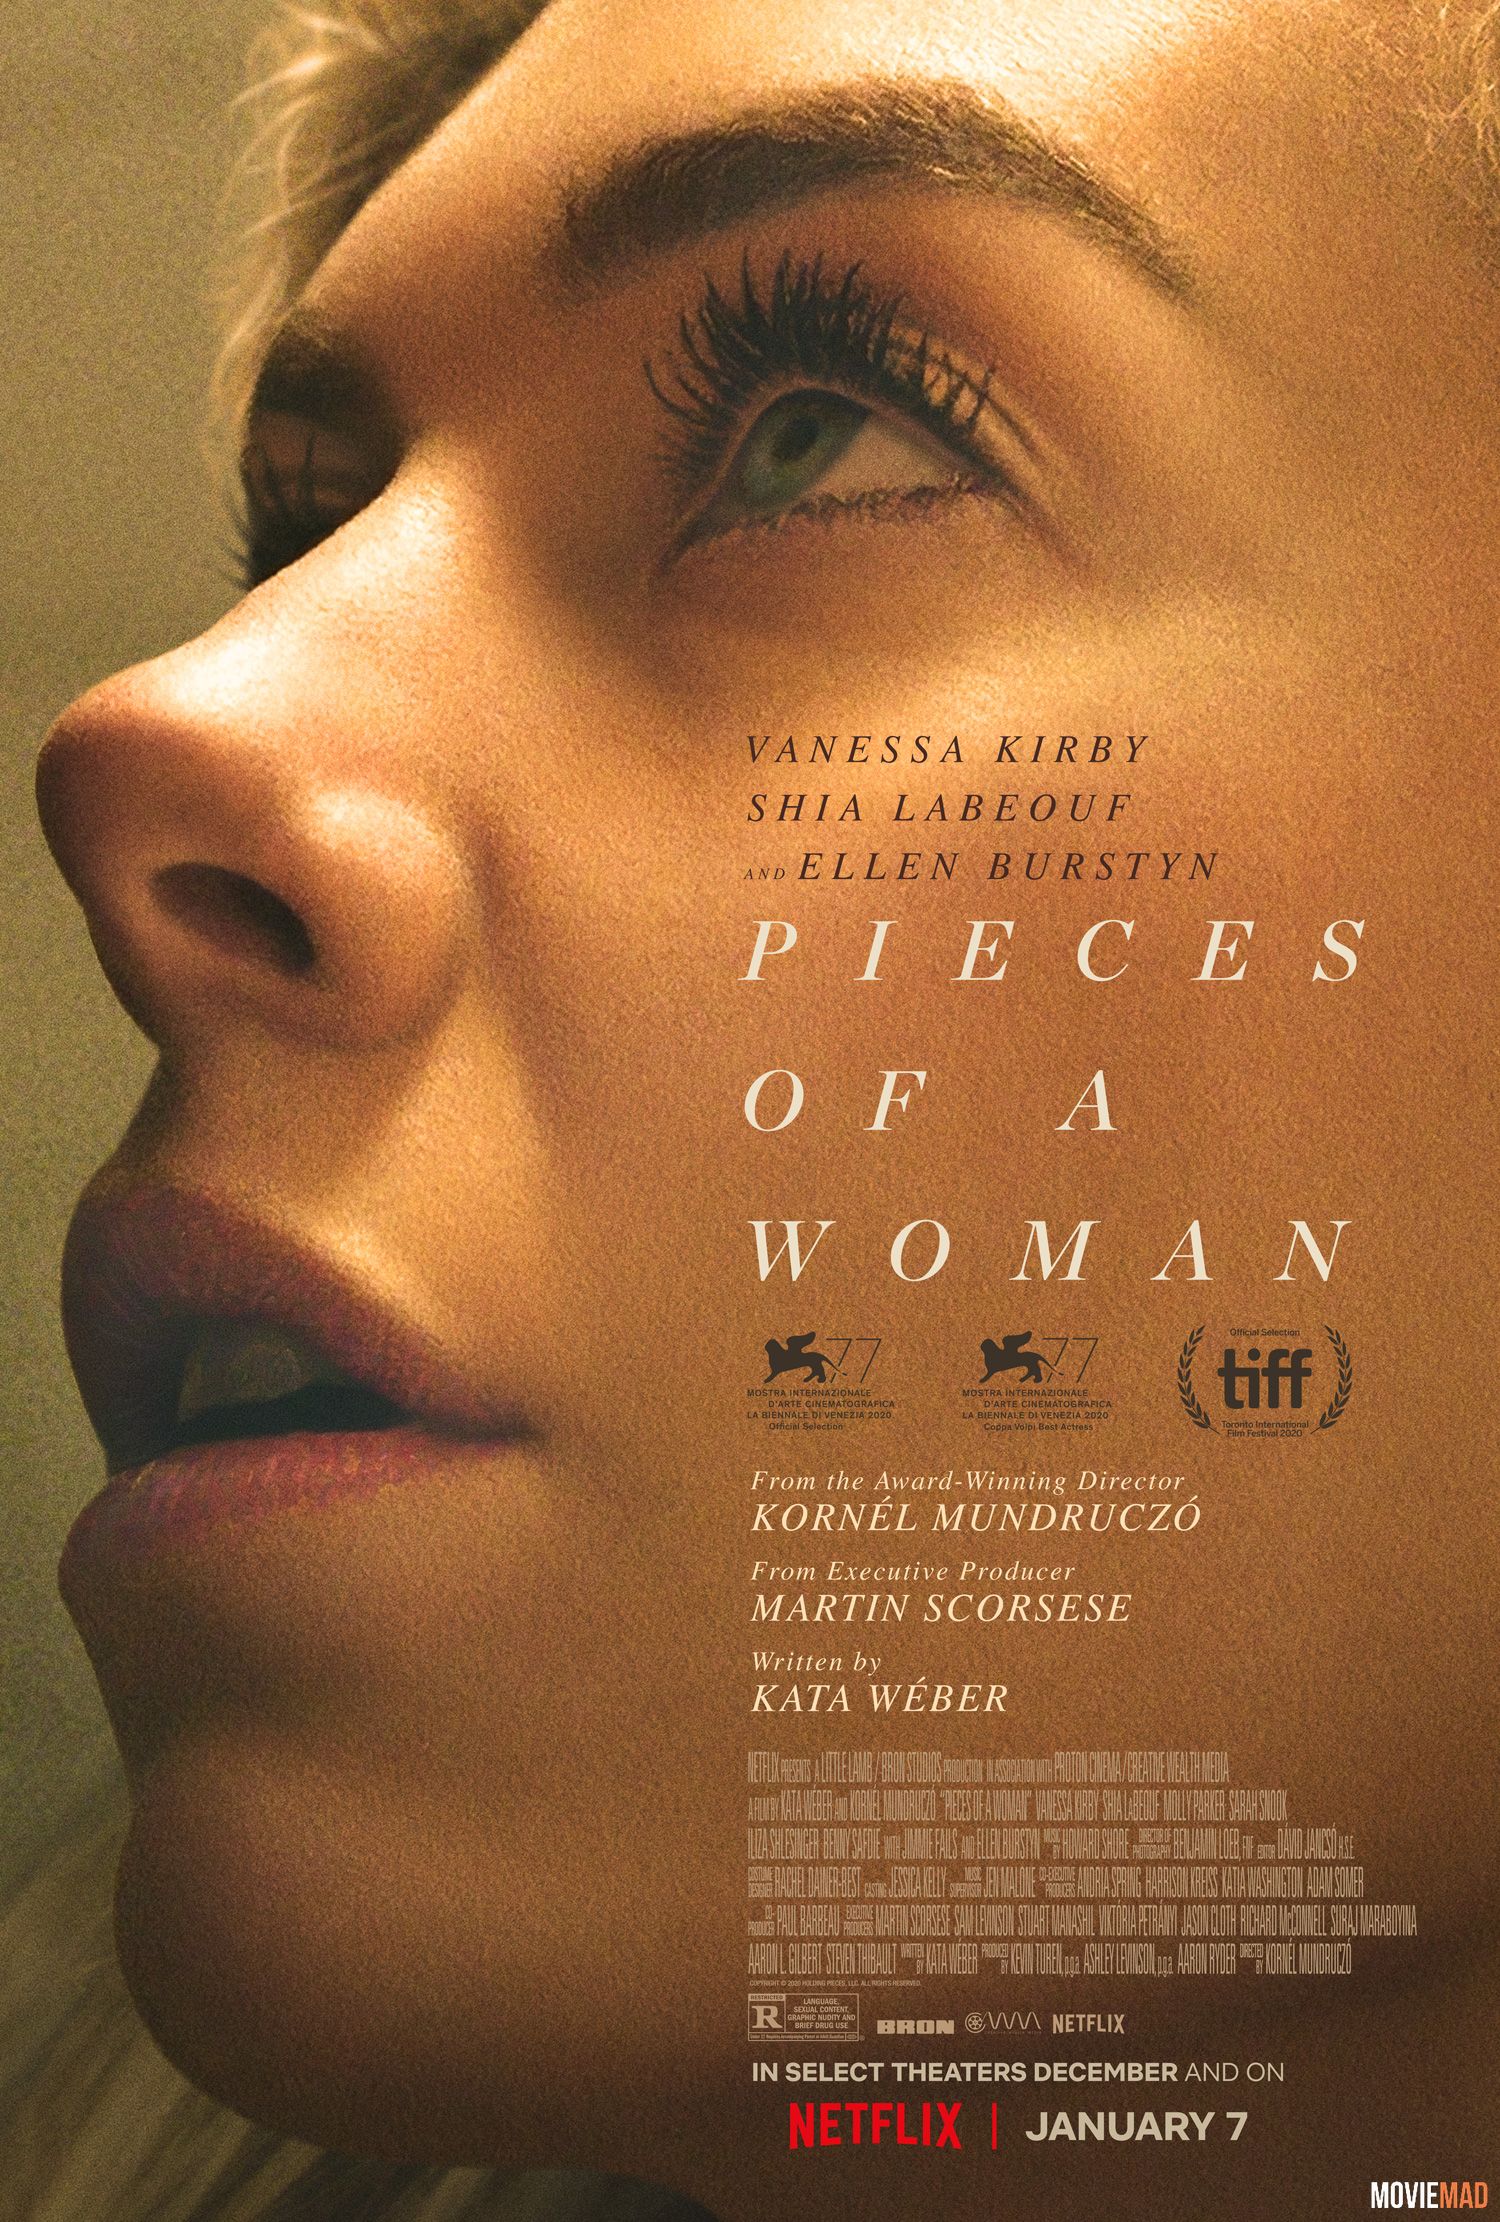 Pieces of a Woman 2020 English WEB DL Full Movie 720p 480p